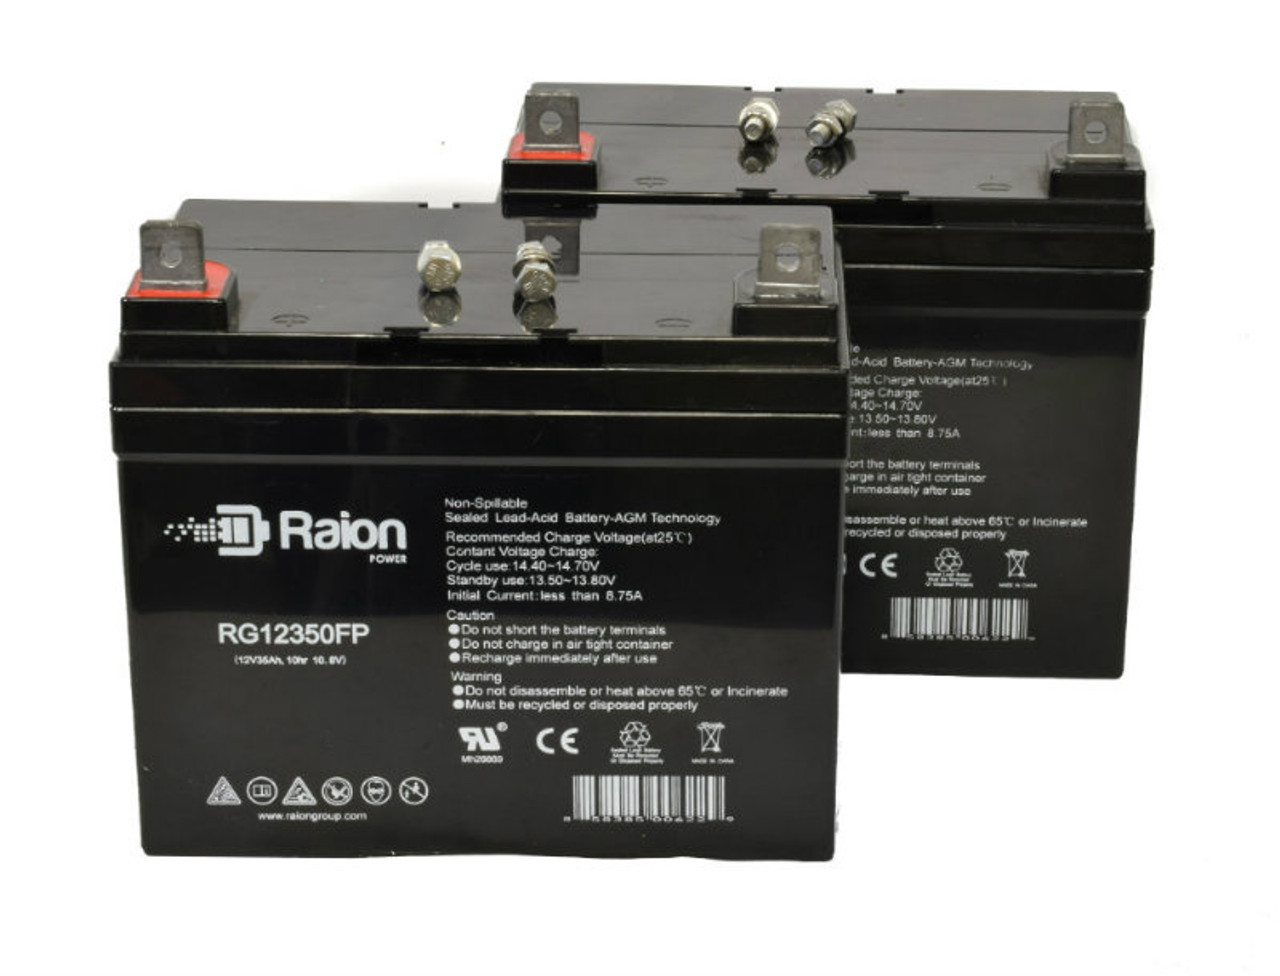 Raion Power Replacement 12V 35Ah Lawn Mower Battery for J.I. Case & Case IH 446 - 2 Pack